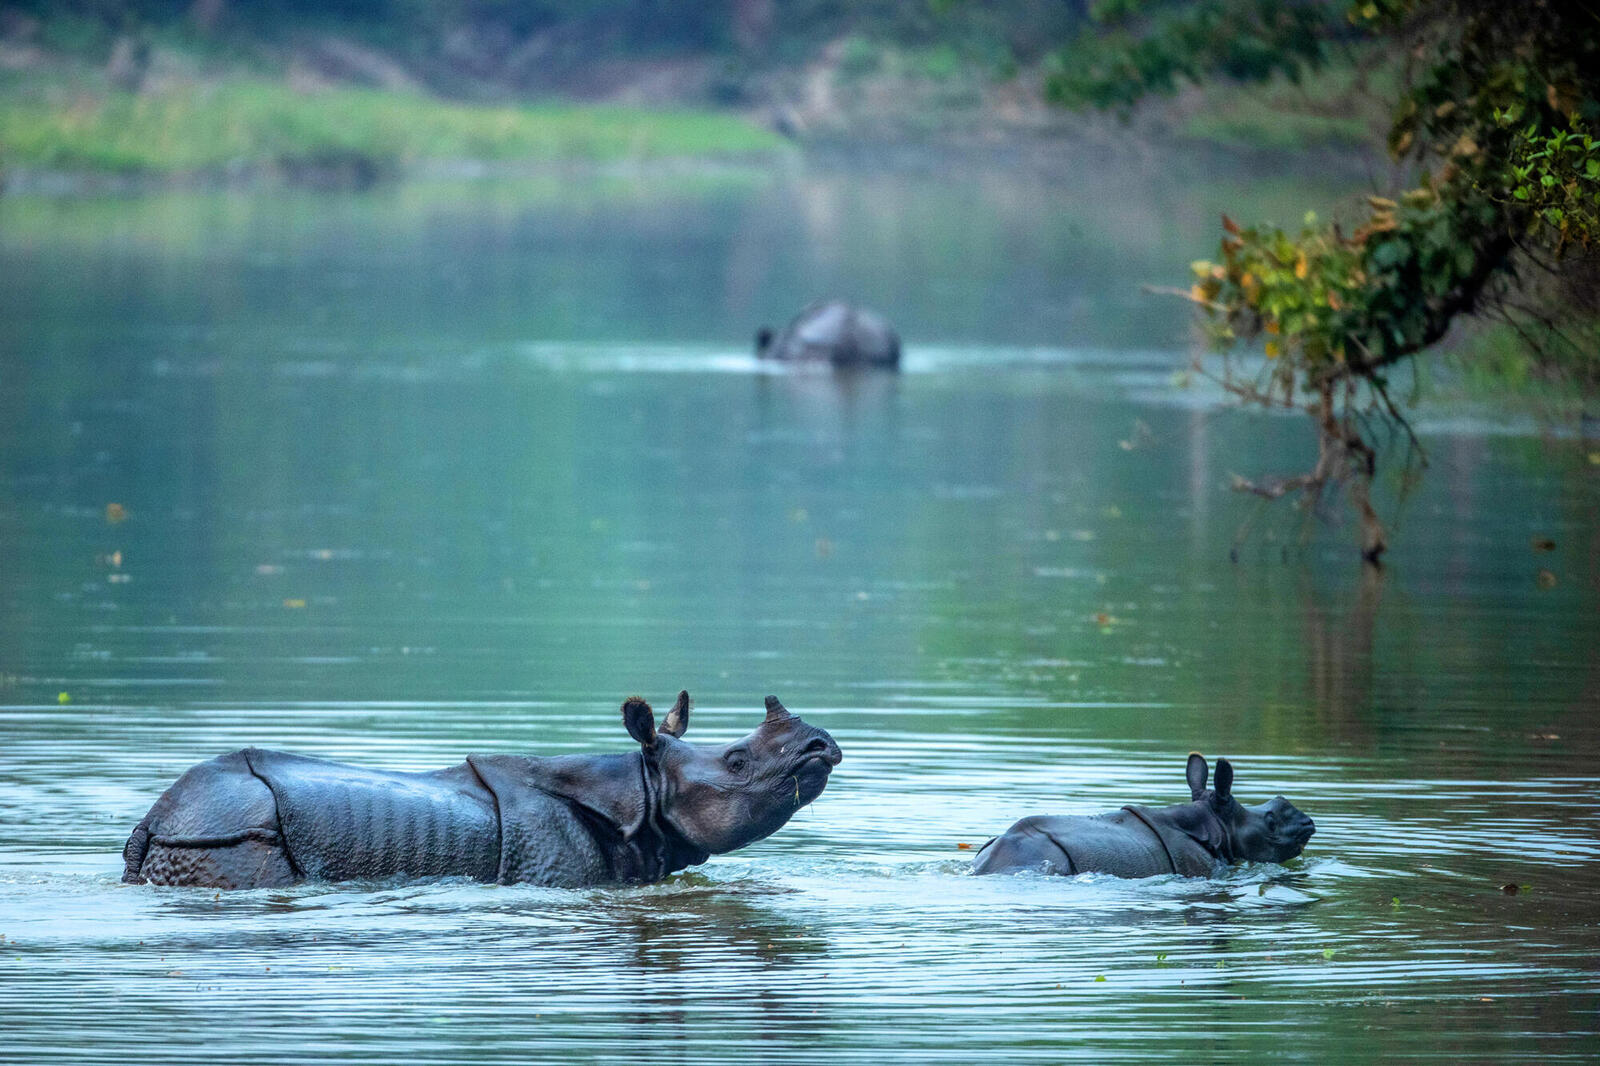 An adult and baby rhino standing in water